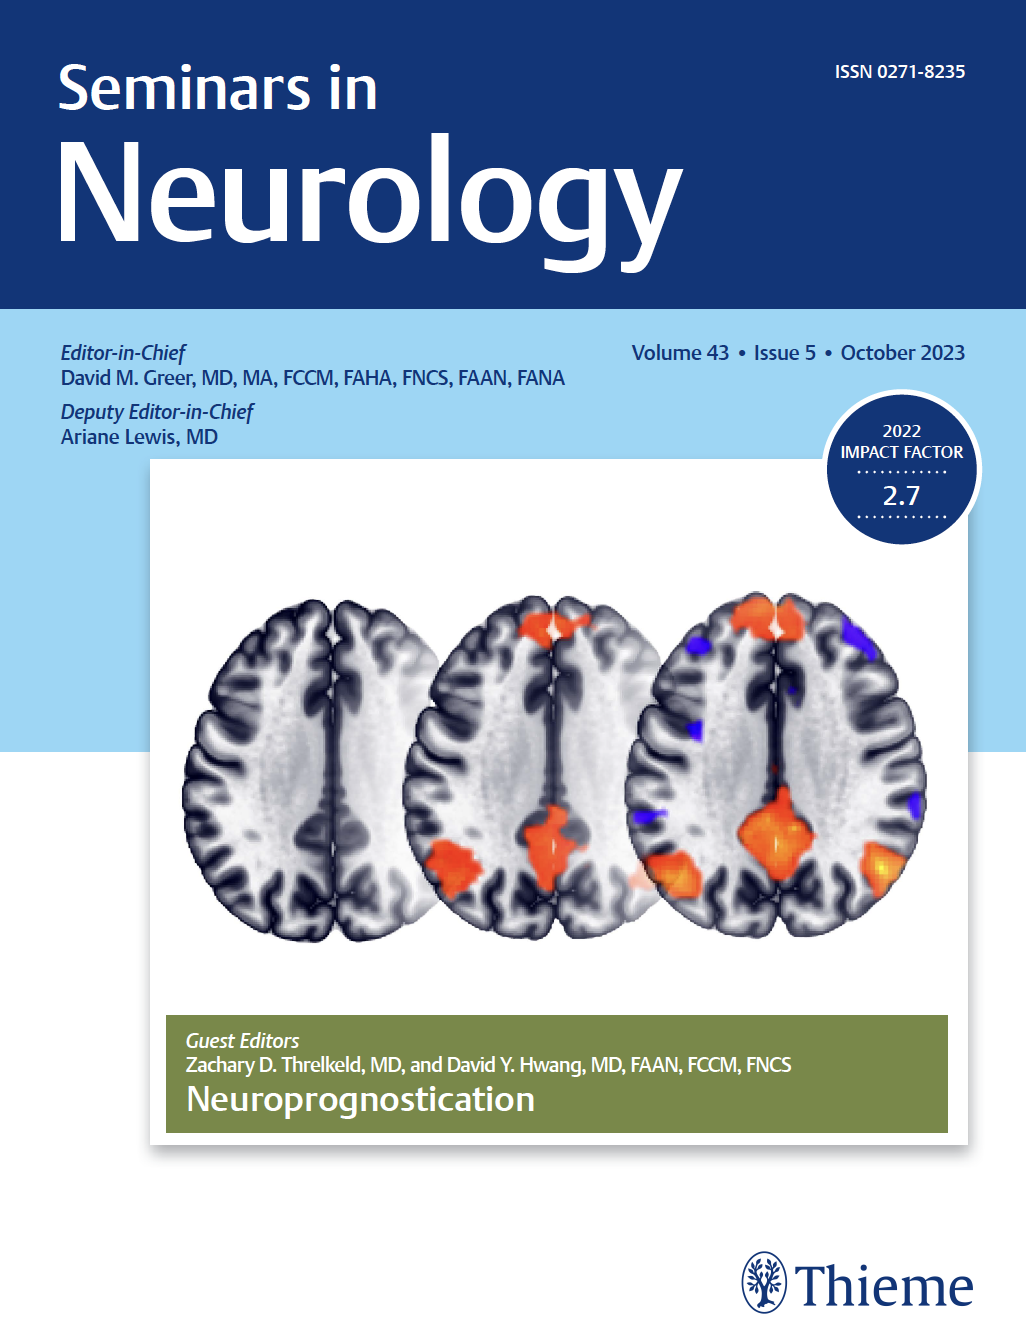 seminars in neurology front page image